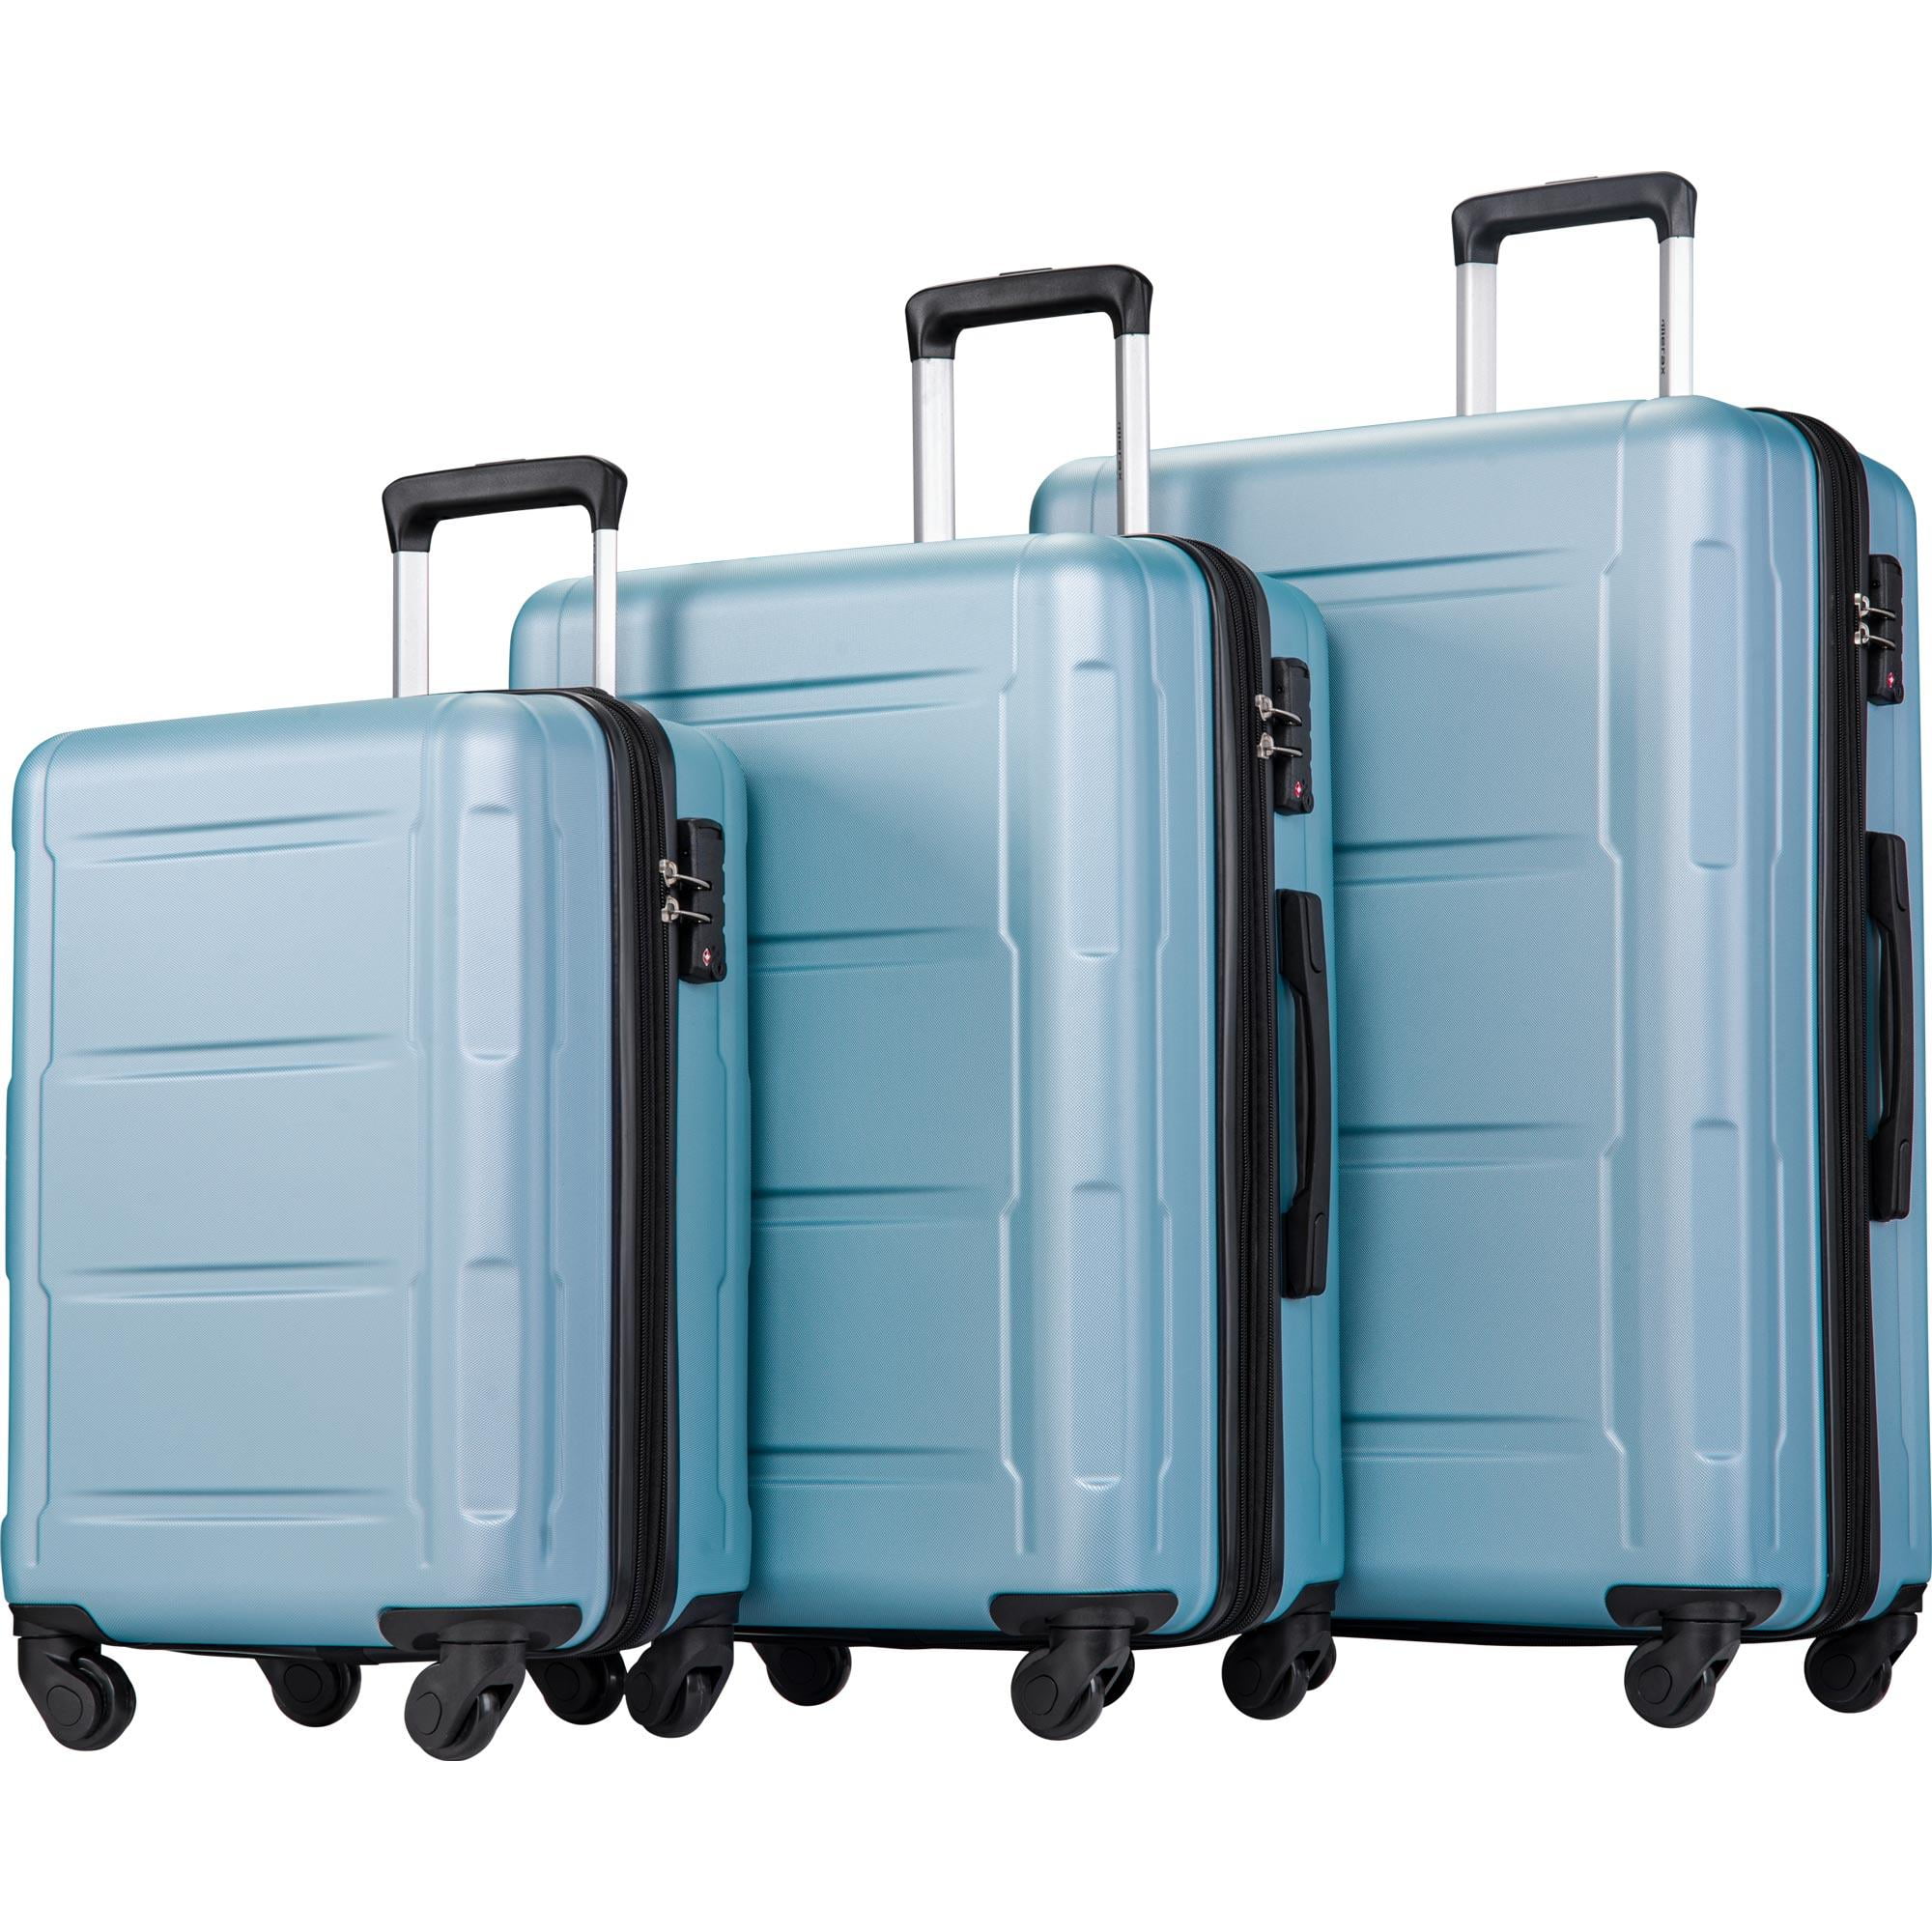 Zimtown 3 Piece Luggage Set, Carry on Suitcase Sets Hardside Lightweight  Spinner with TSA Lock, Sea Blue 